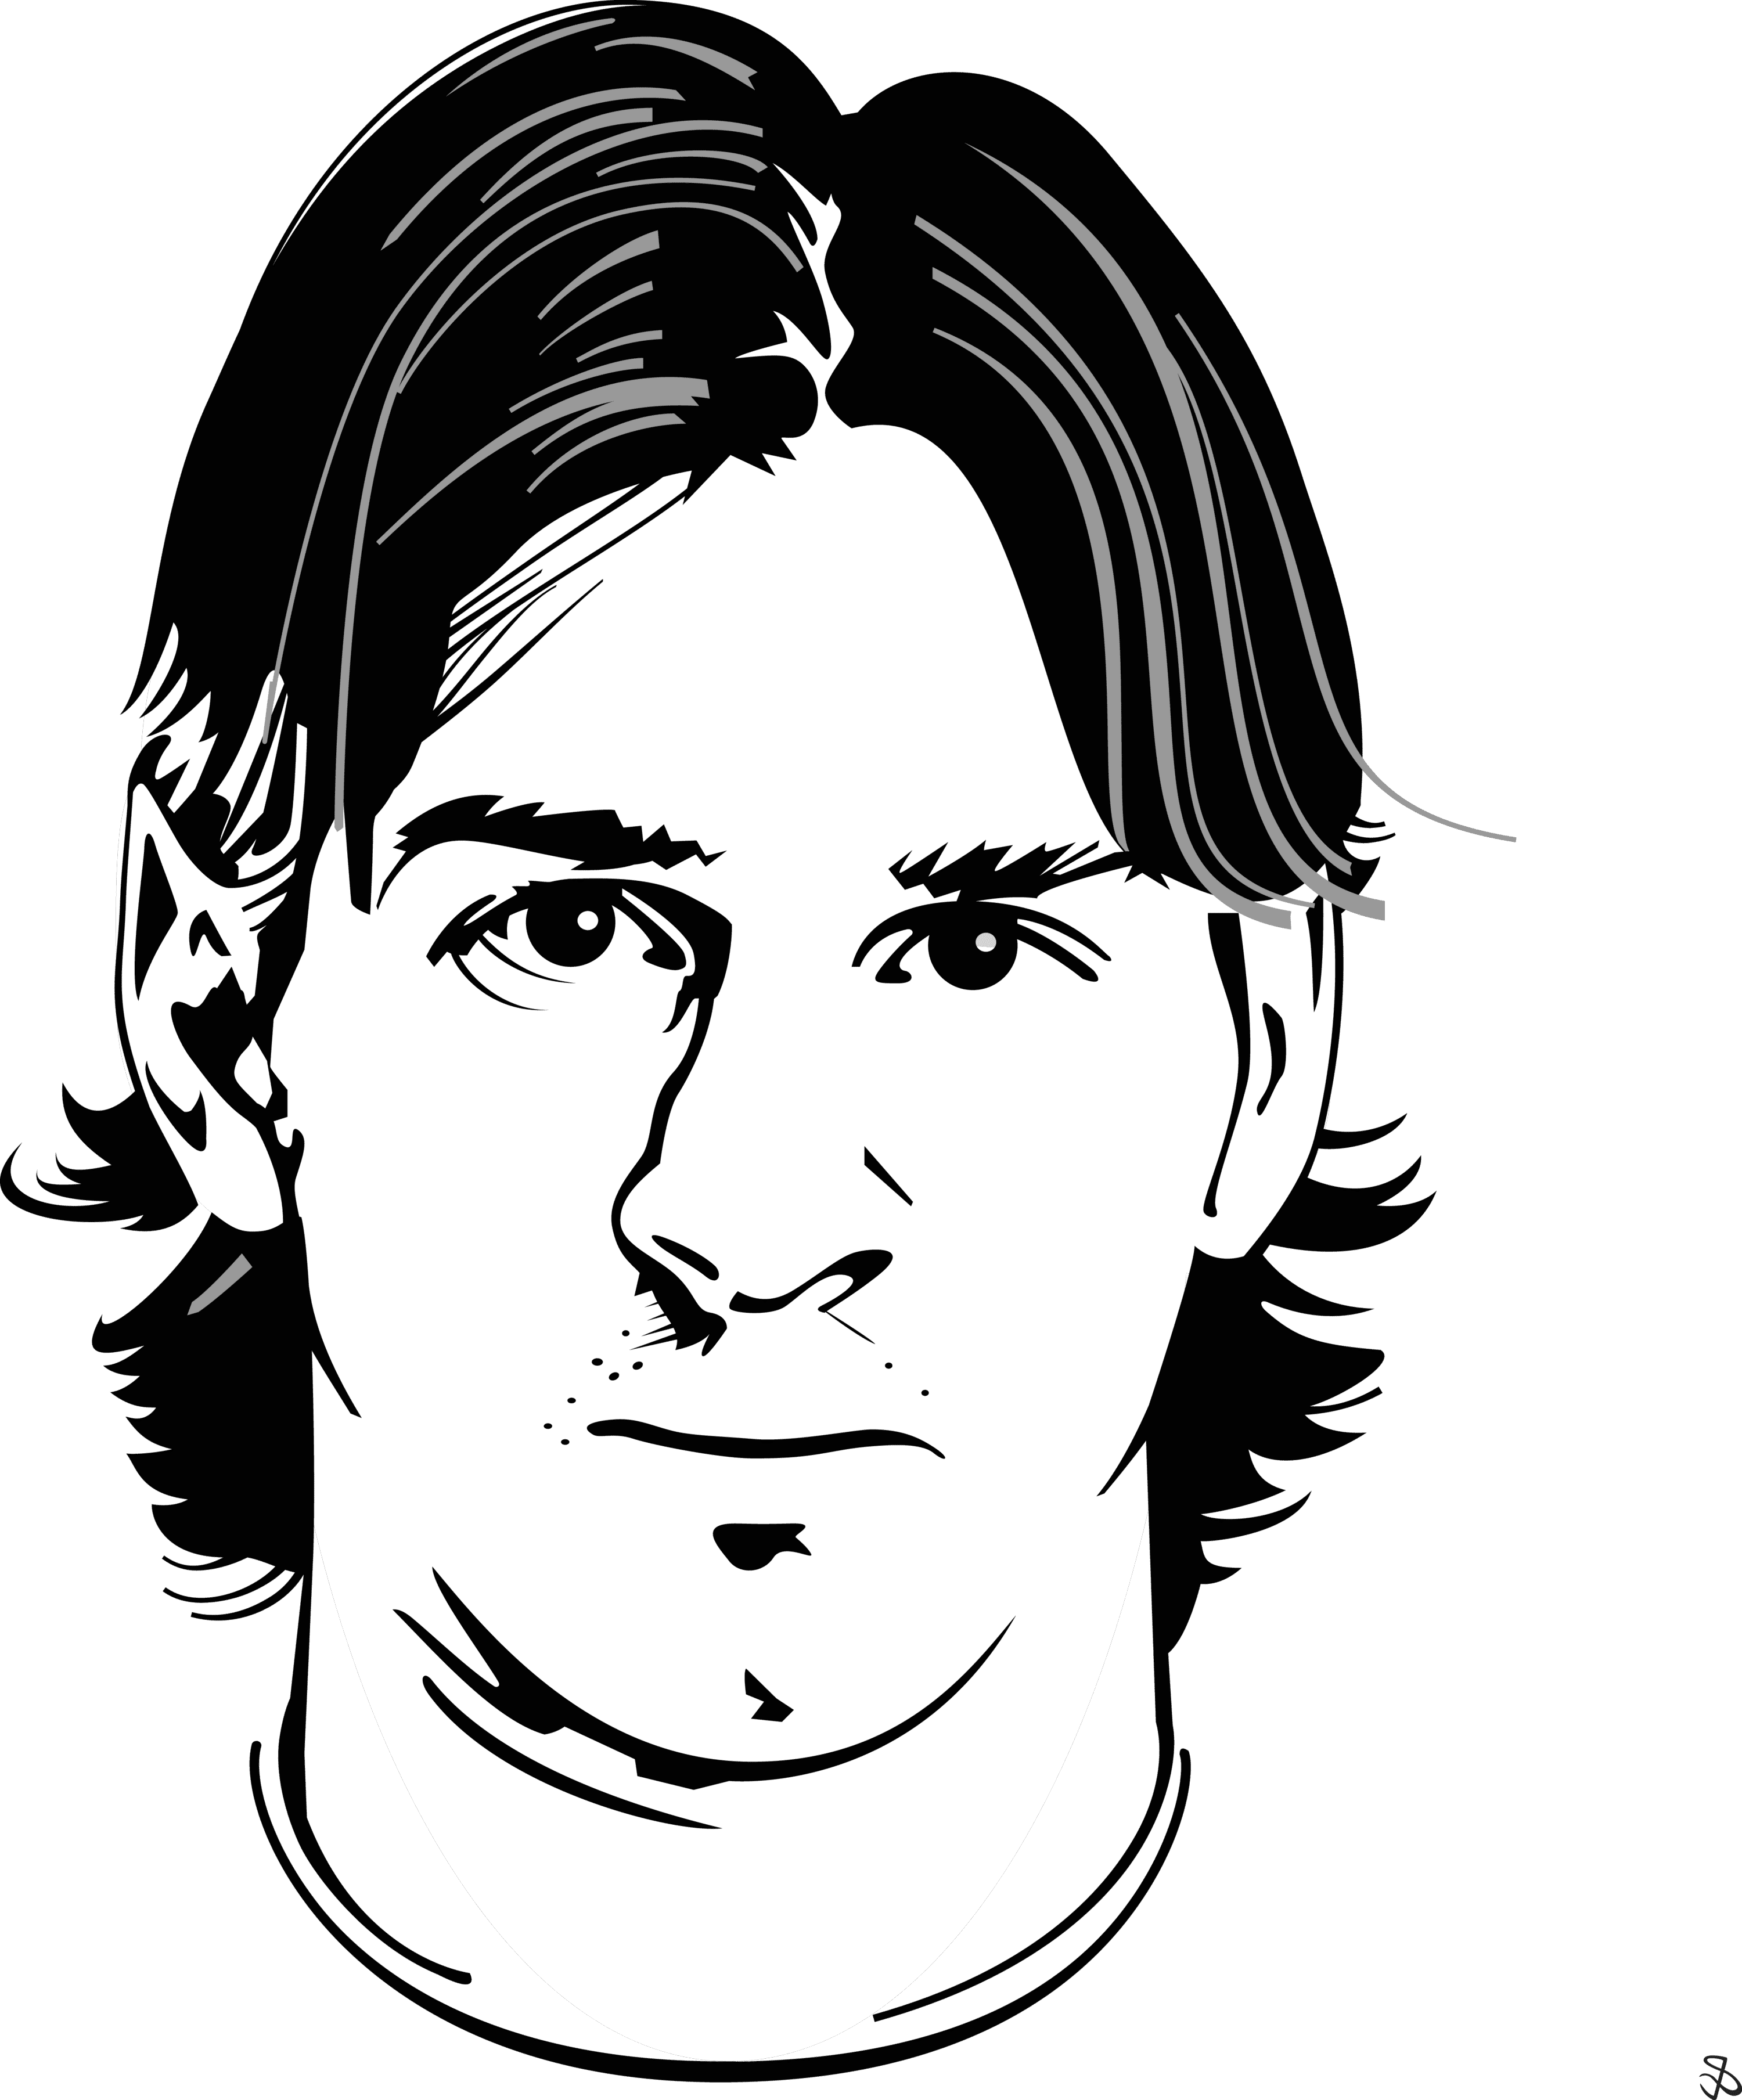 Messi On Sketch Art - Messi - Posters and Art Prints | TeePublic